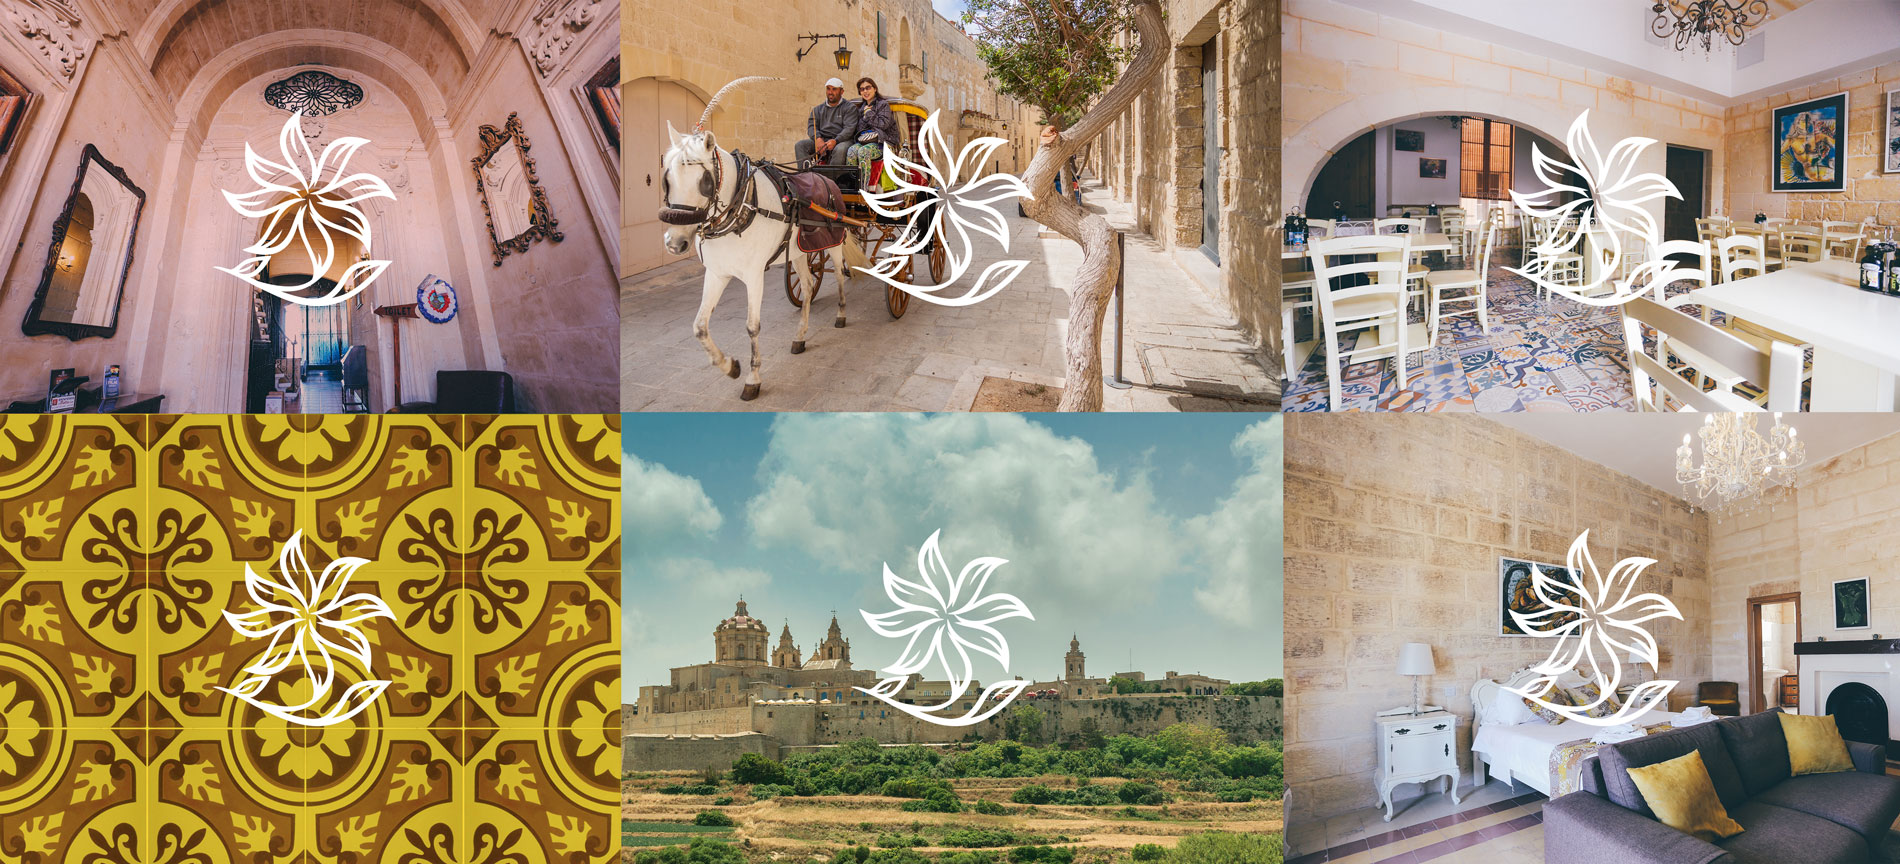 Point de Vue logo white Mdina and Hotel backgrounds